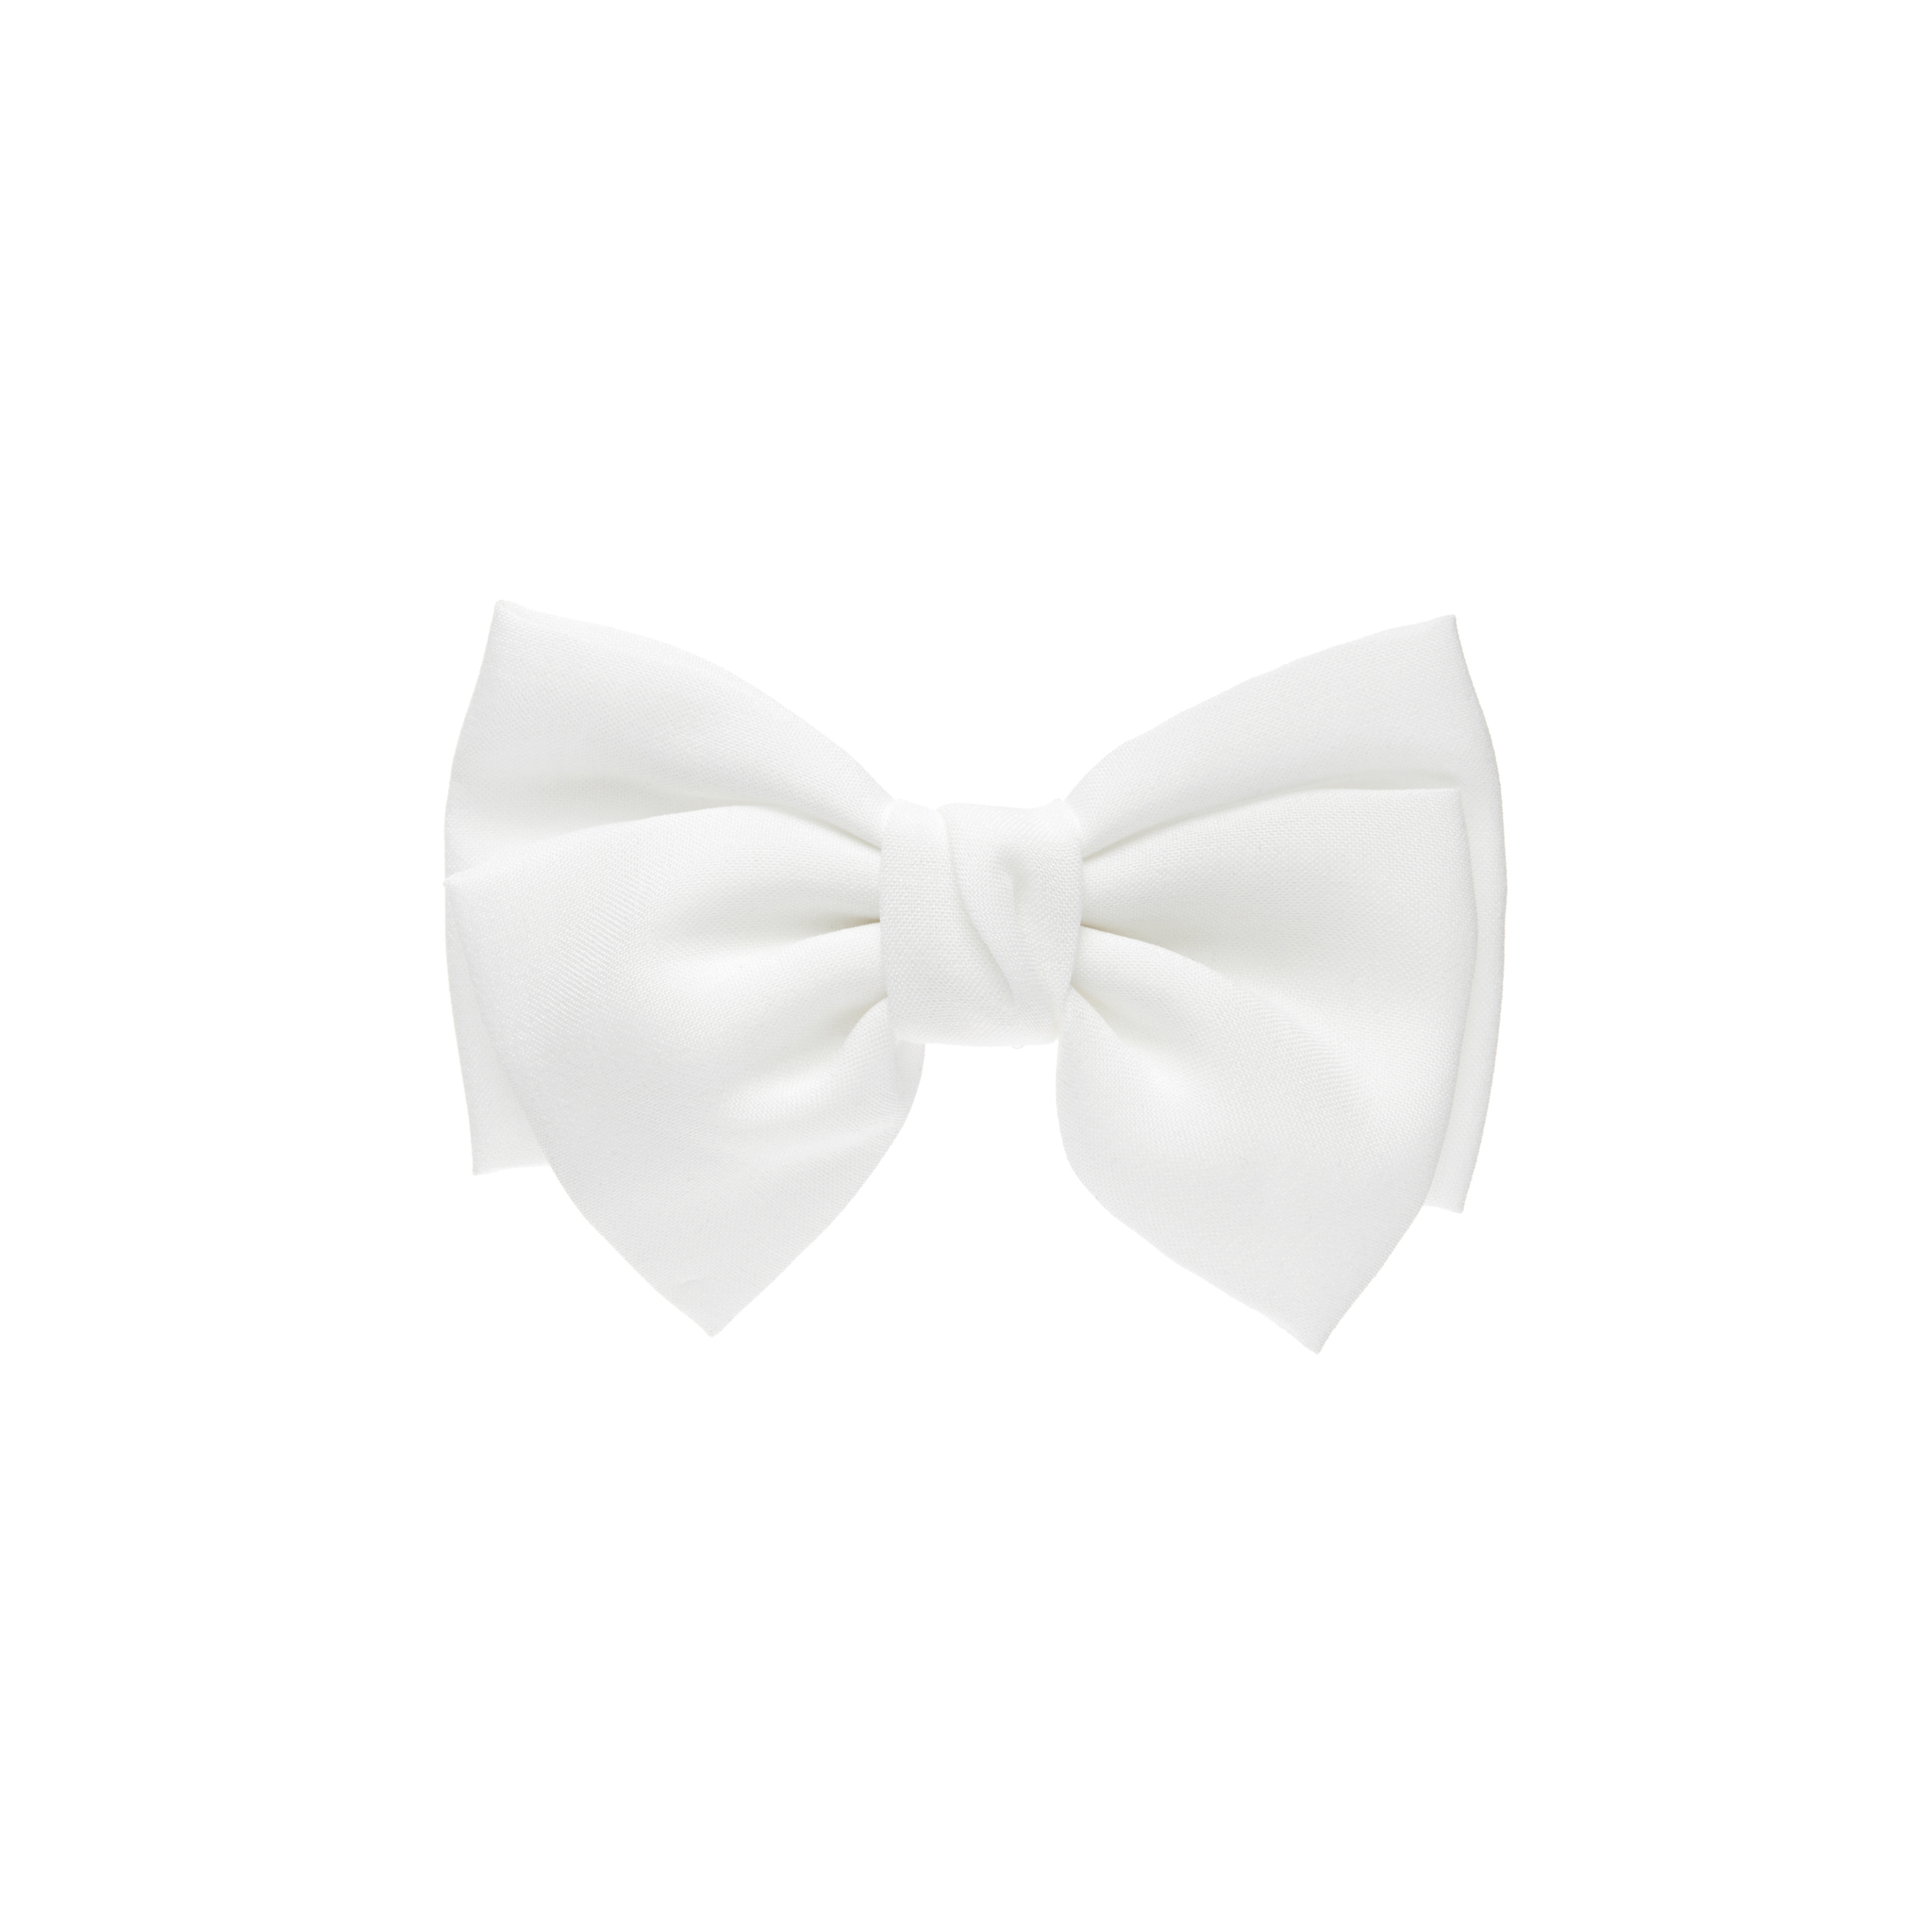 HOLLY JUNE Заколка Bow Hair Clip – White elegant velvet pearl barrettes bow hair clip bow hairpins vintage women girls black wine red bow hair clip tie prom accessories